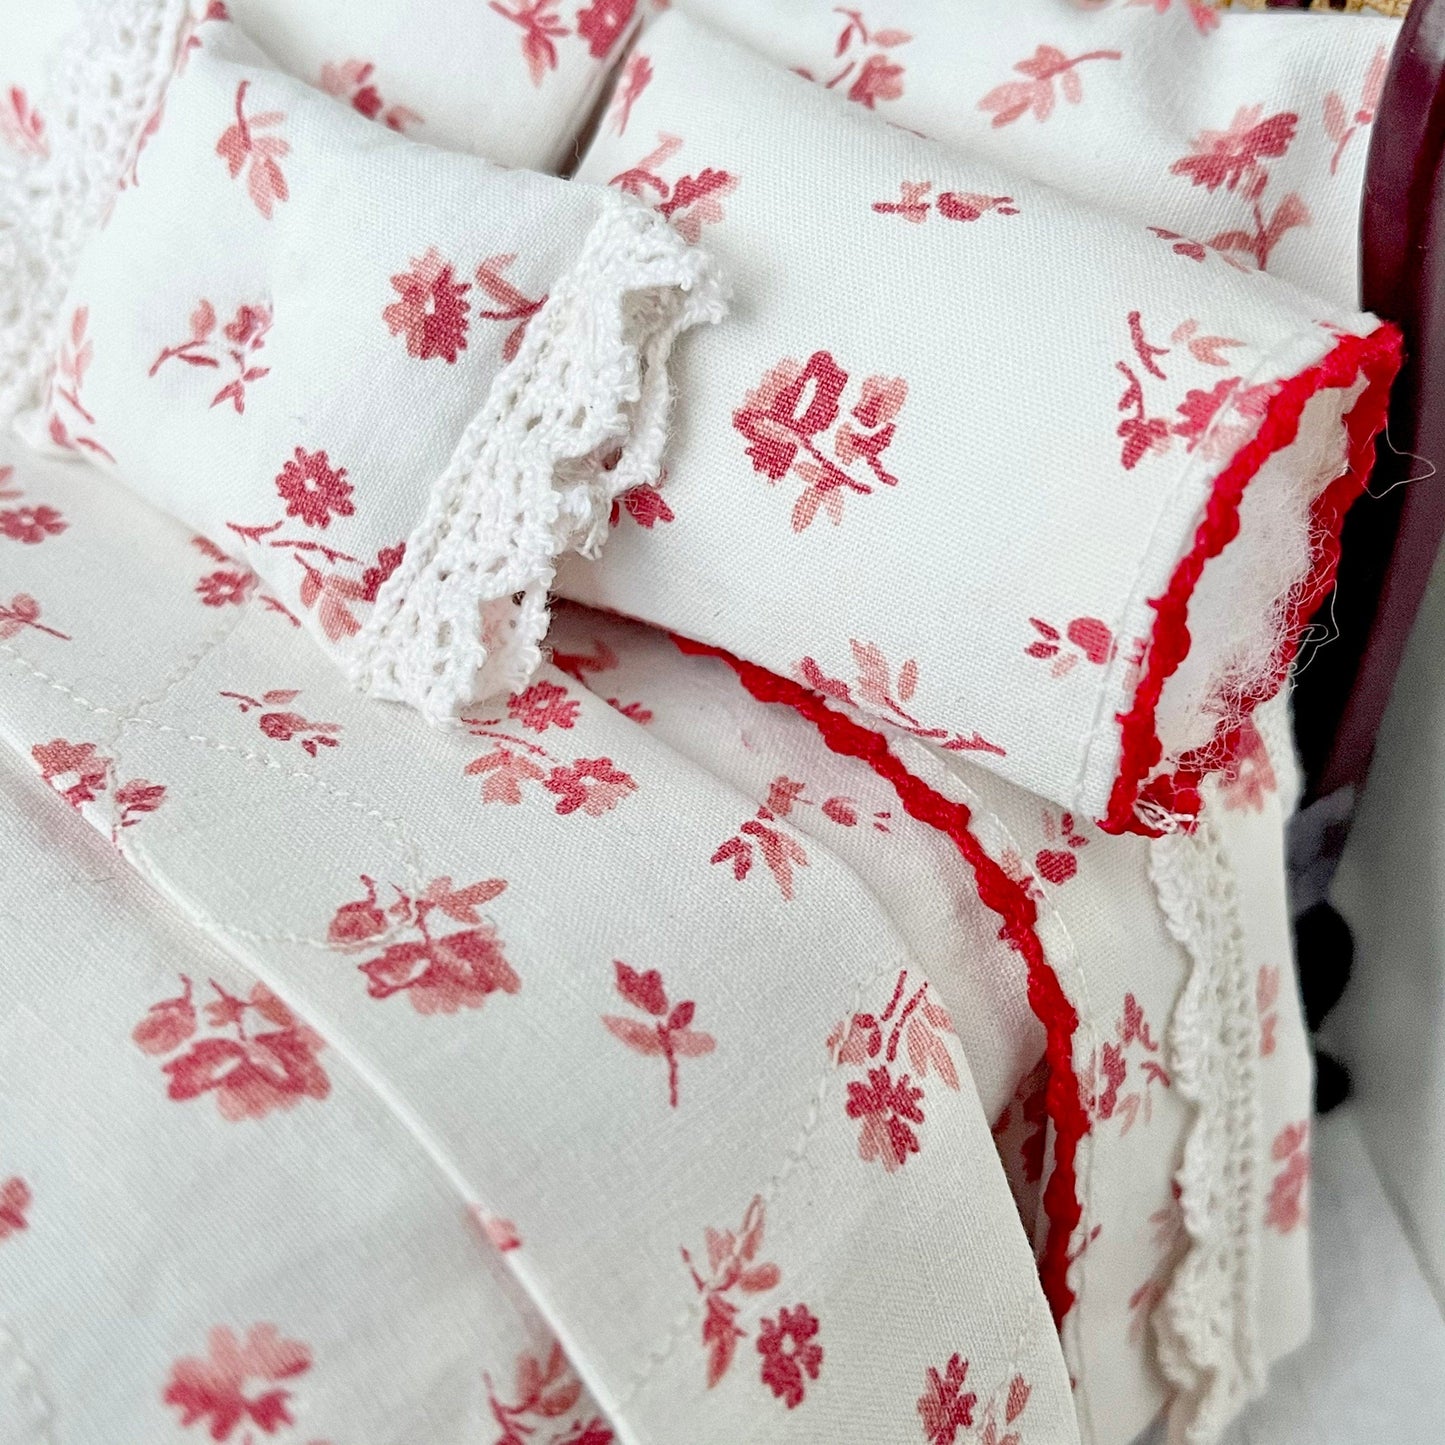 Chantallena Doll House Rustic Dollhouse Bedding, Petite Red Floral Cotton Bedding Set with Lace Trim, 1:12 Scale, Decor, Miniatures, Farmhouse Country, Chantallena